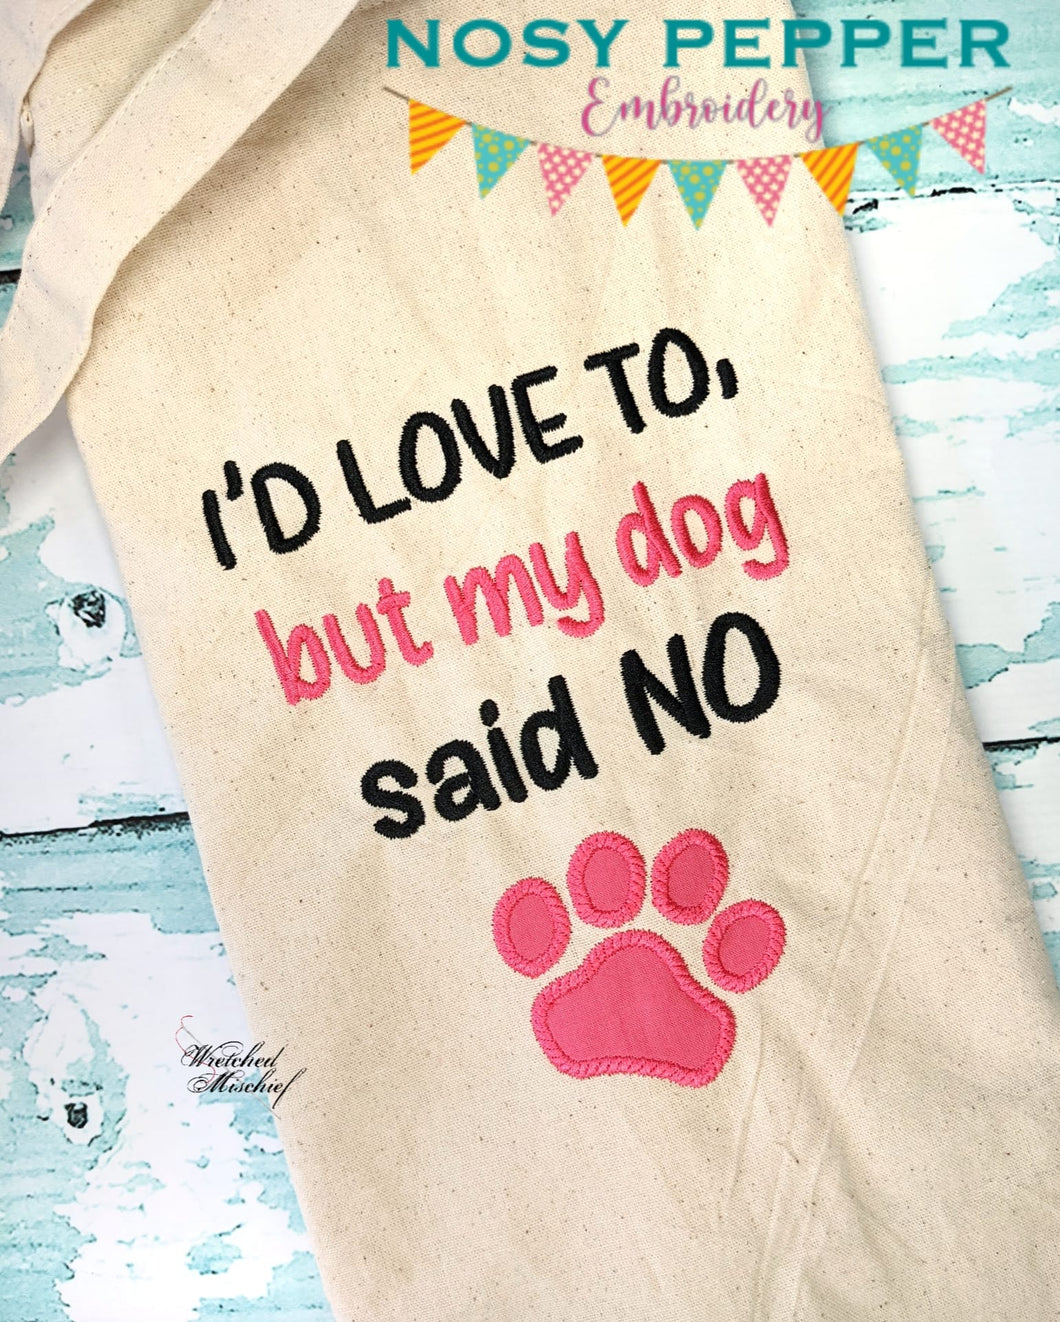 I'd love to but my dog said no applique machine embroidery design (4 sizes included) DIGITAL DOWNLOAD